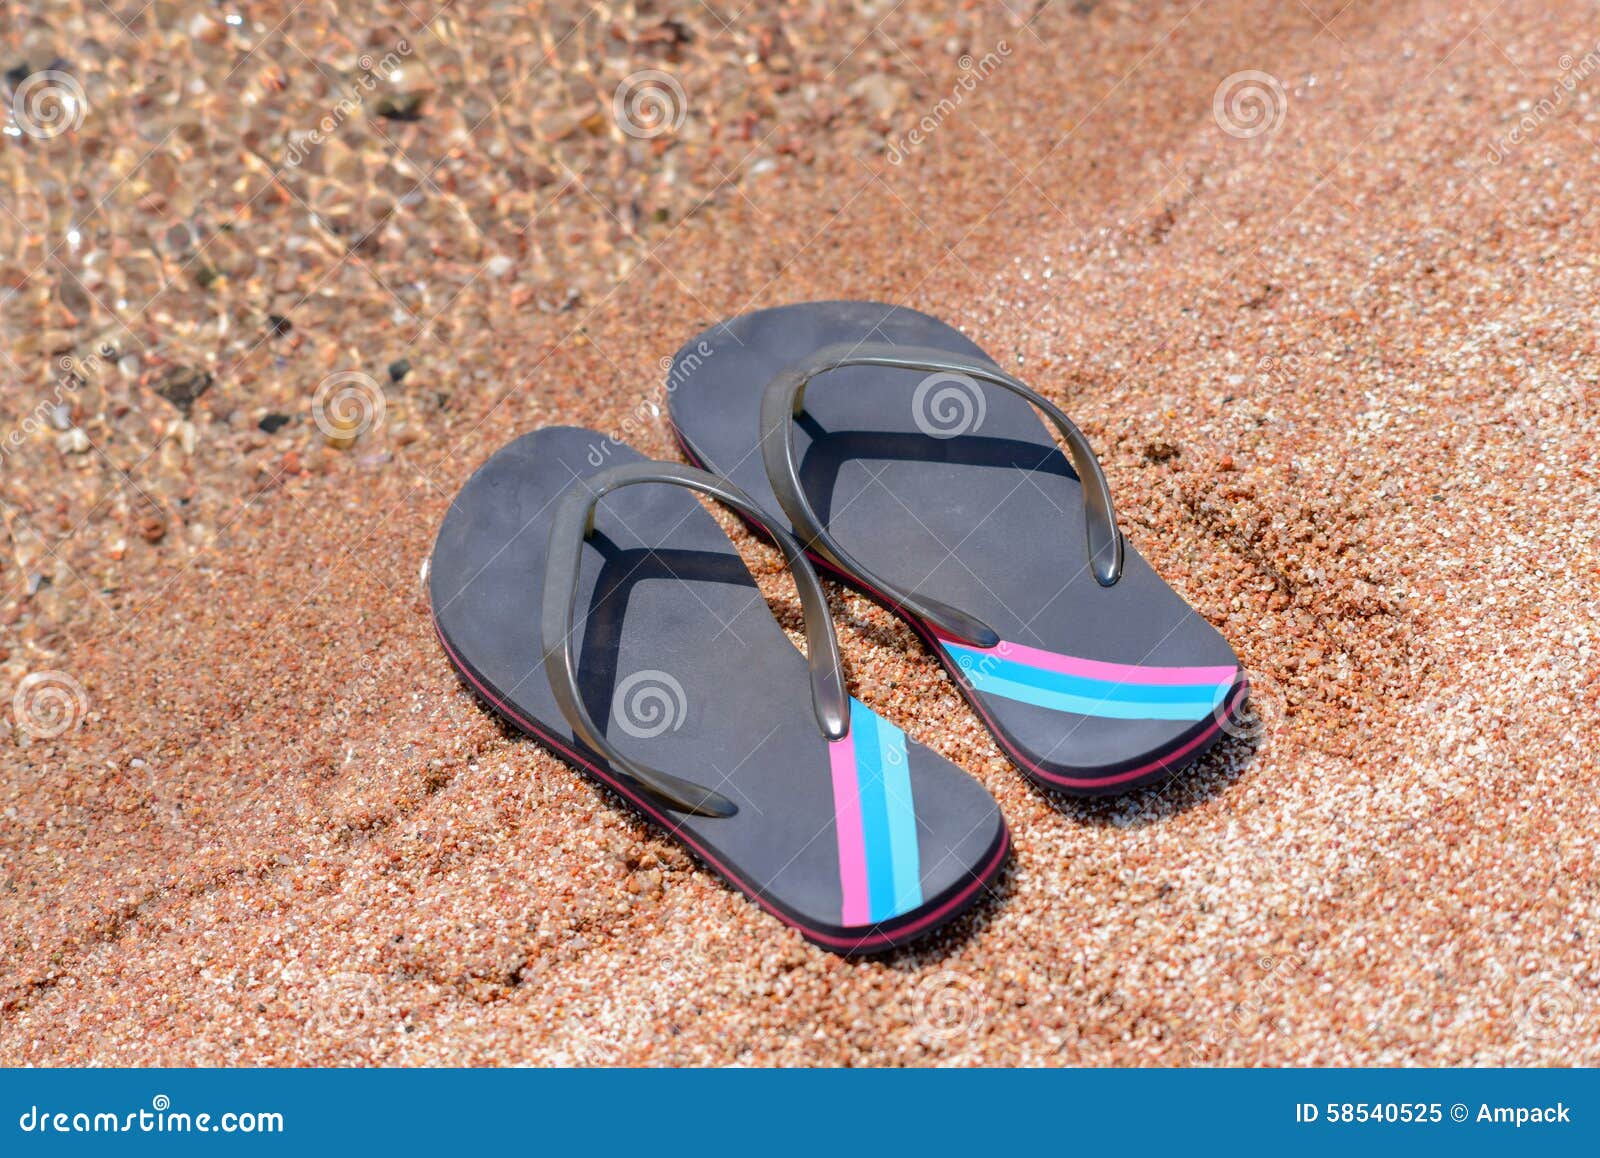 Pair of Flip Flops on Sandy Beach Shore Stock Image - Image of clothing ...